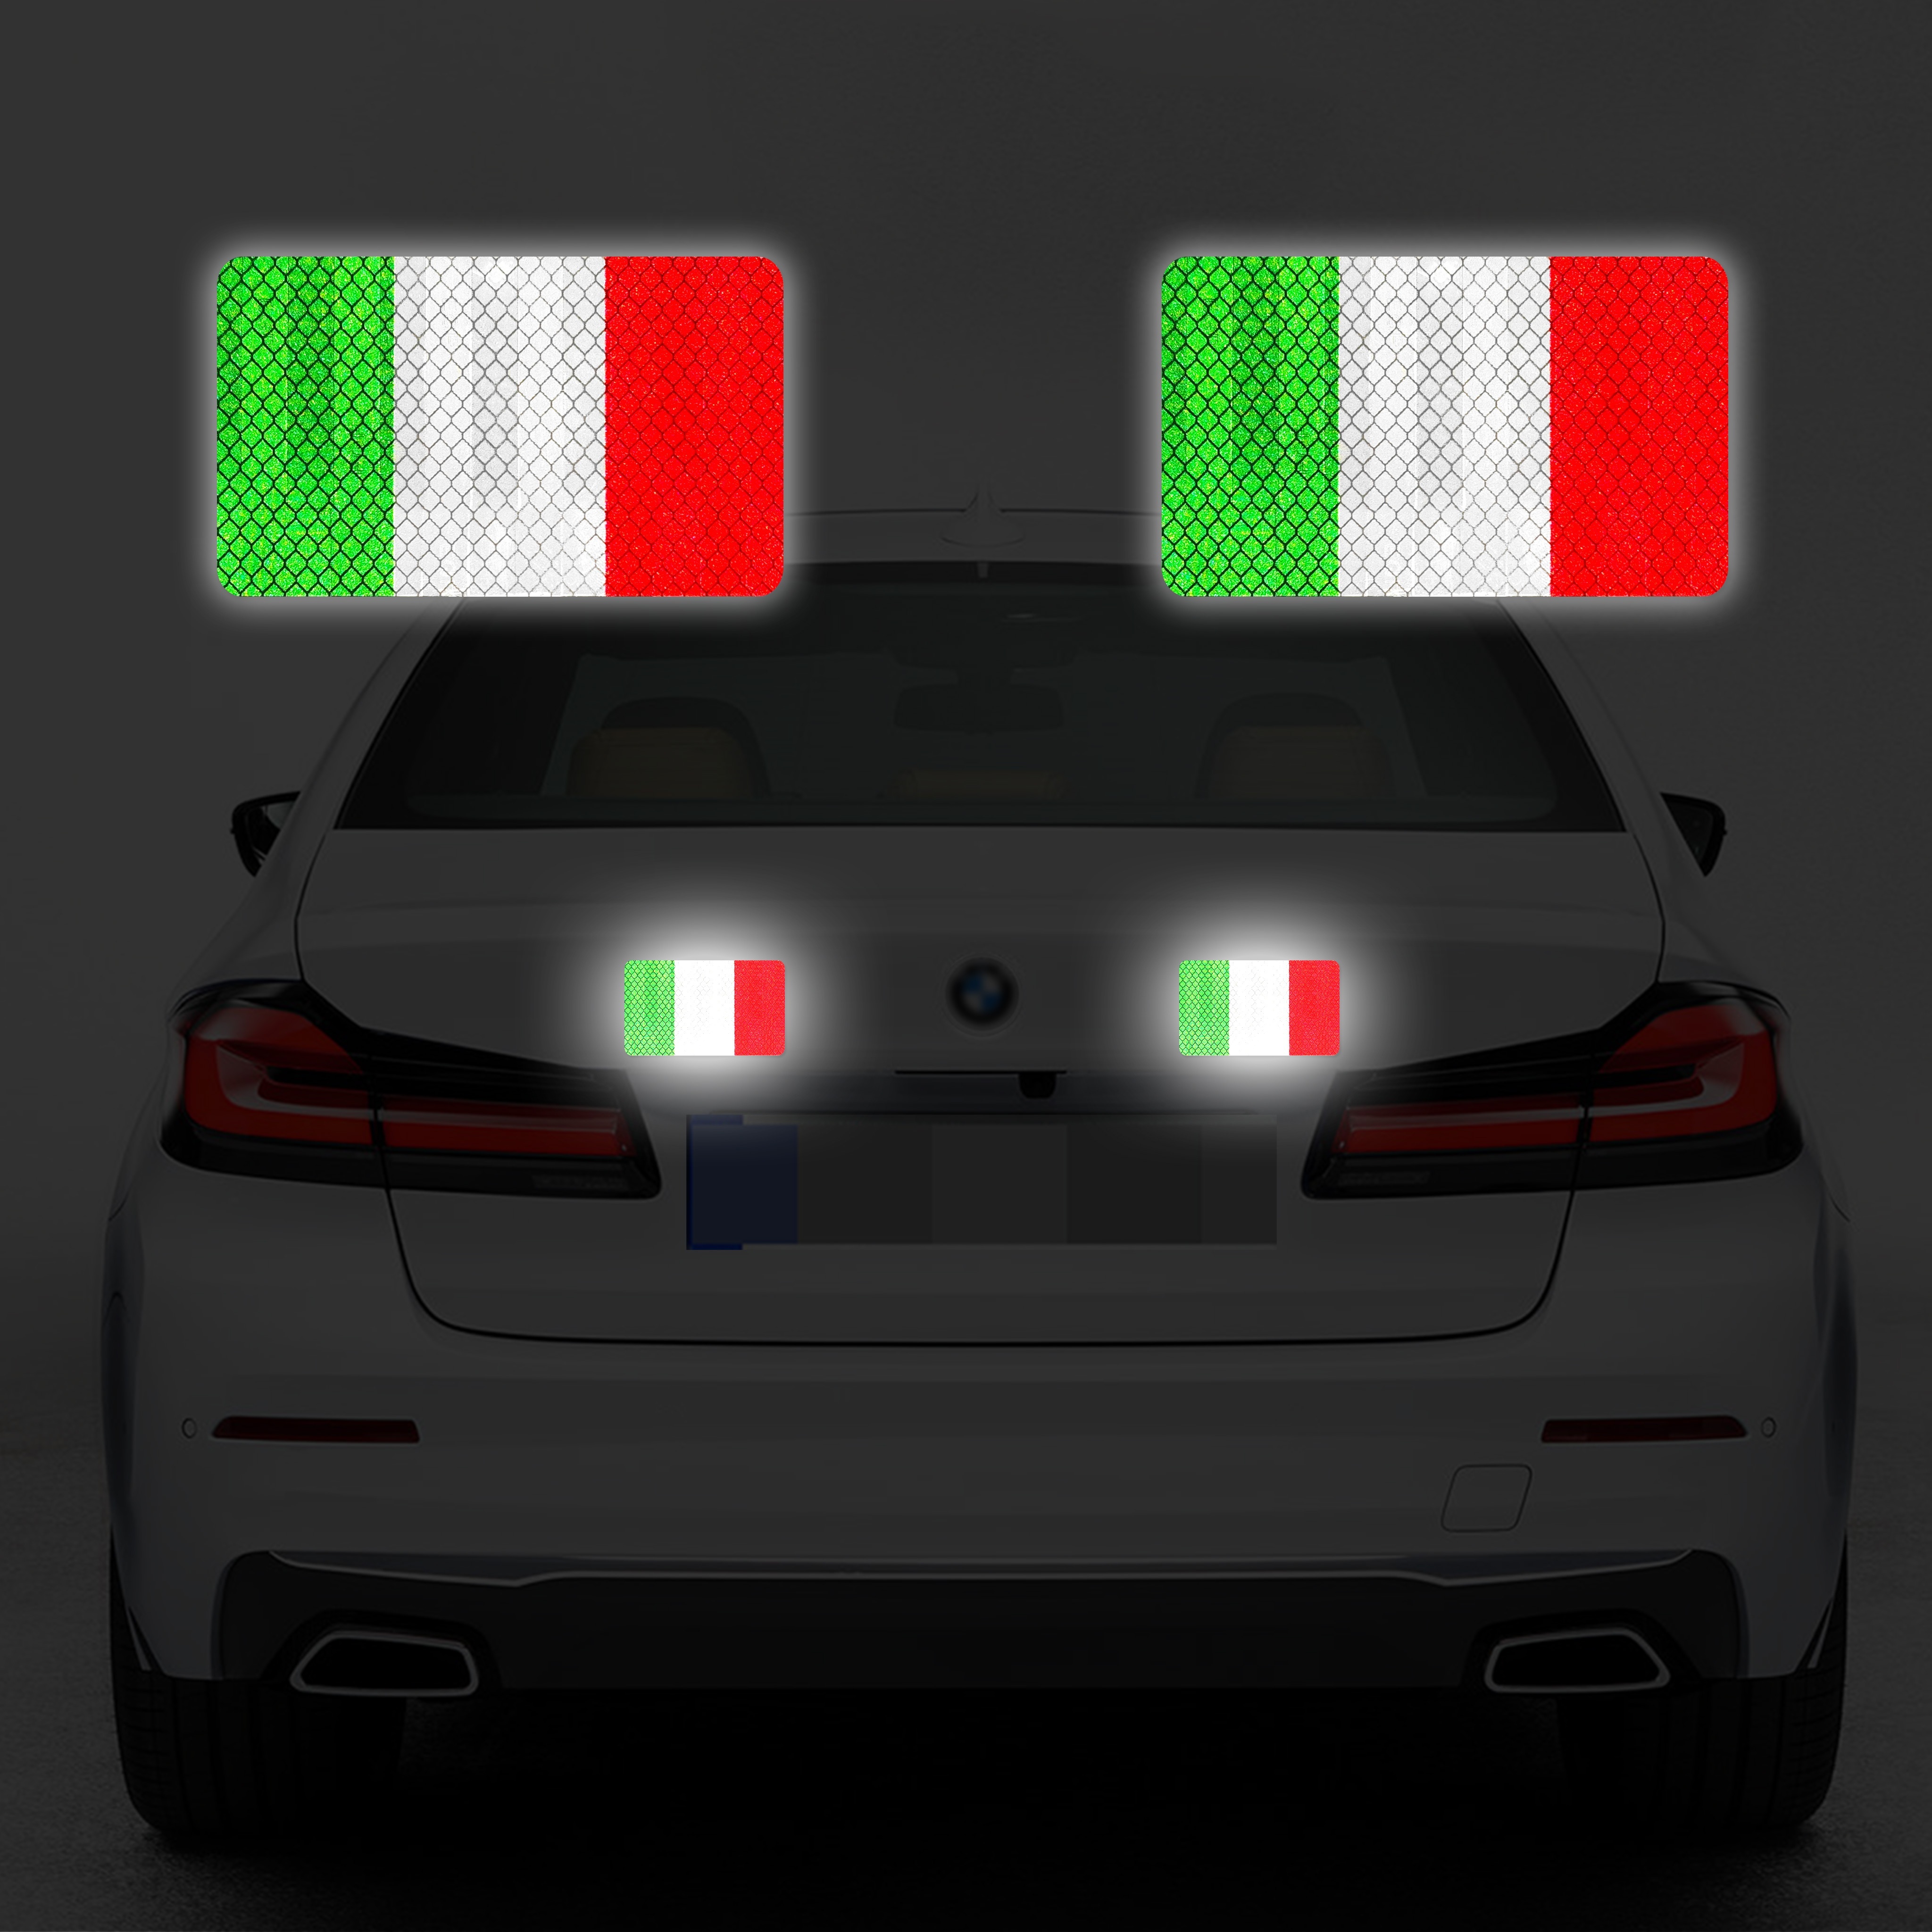 

Italian Flag For Car, Magnet Reflective Patriotic Italy Stickers 2 Packs, No Adhesive And High Brightness, Warning Safety Magnetic Reflective Sheeting